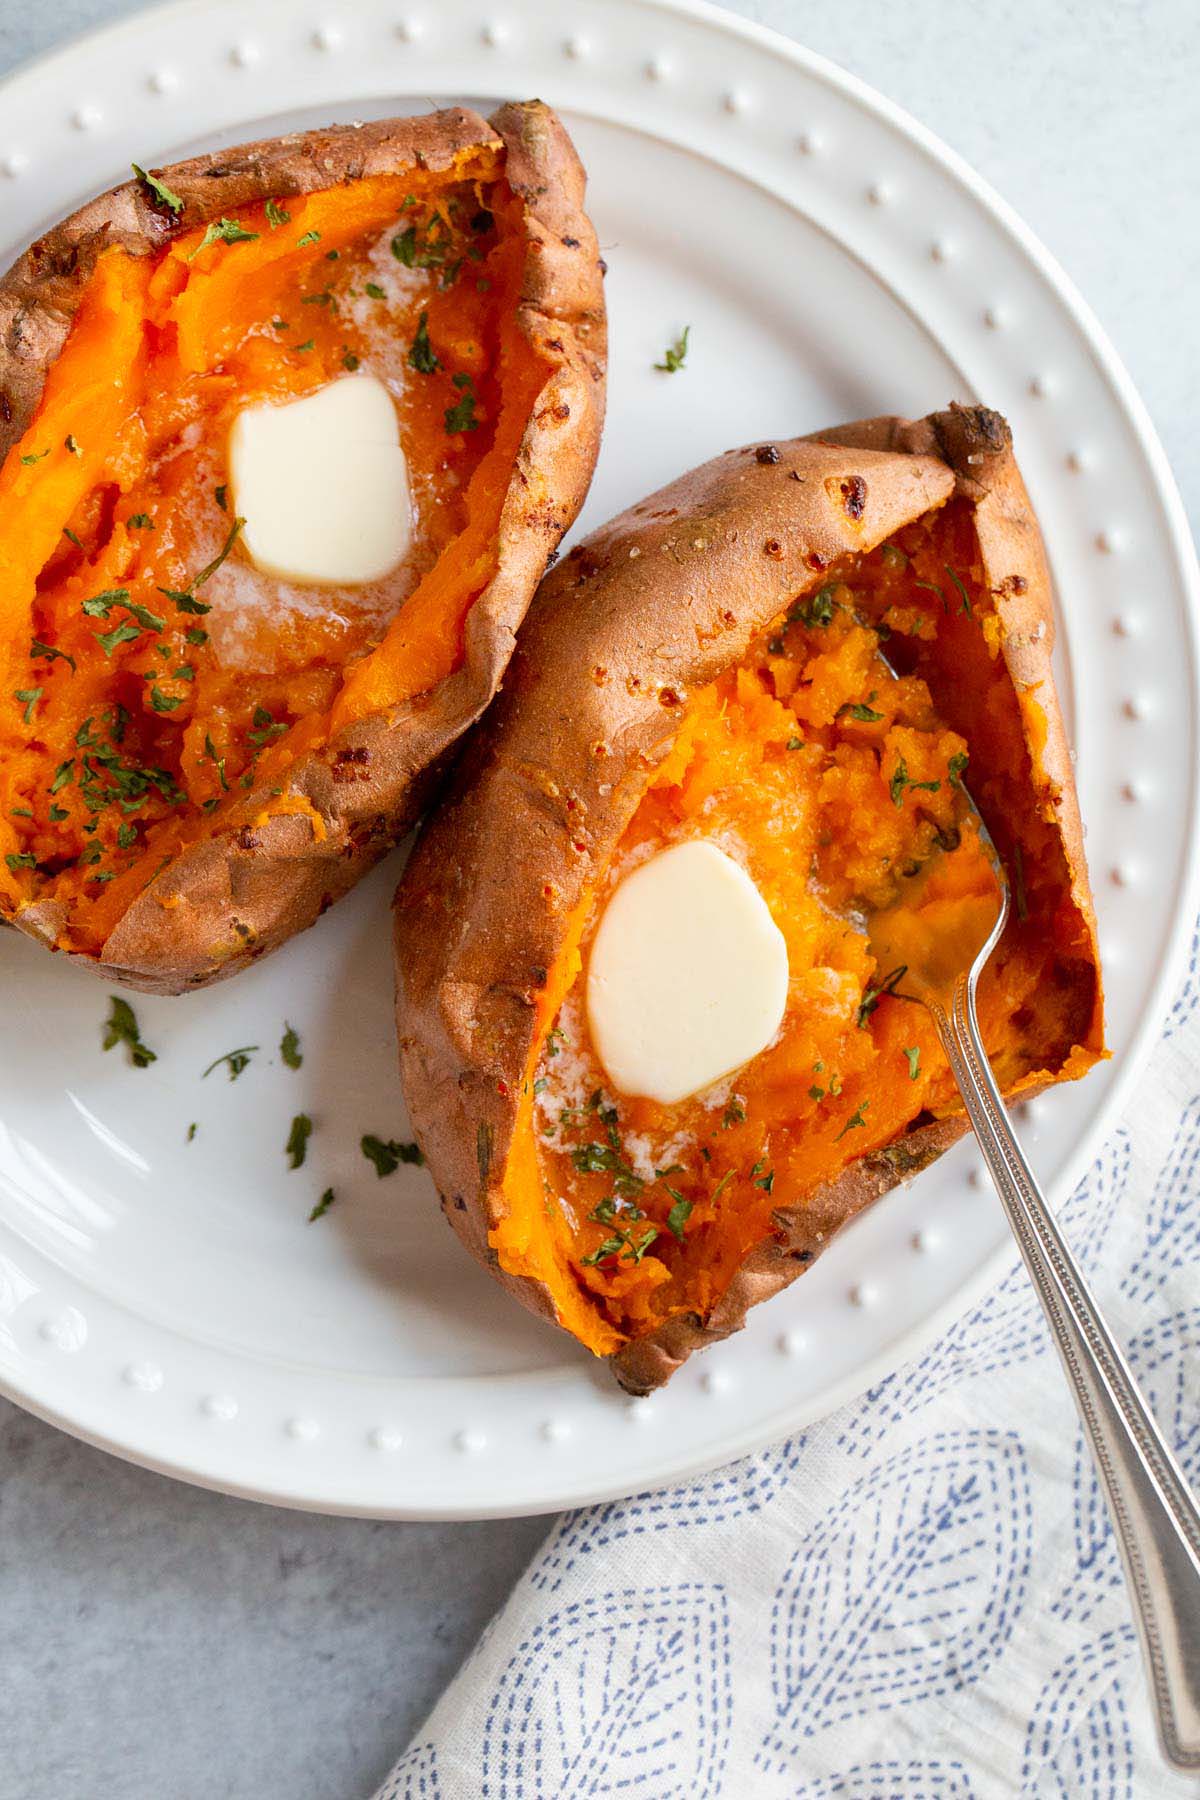 Baked sweet potato with butter and parsley.